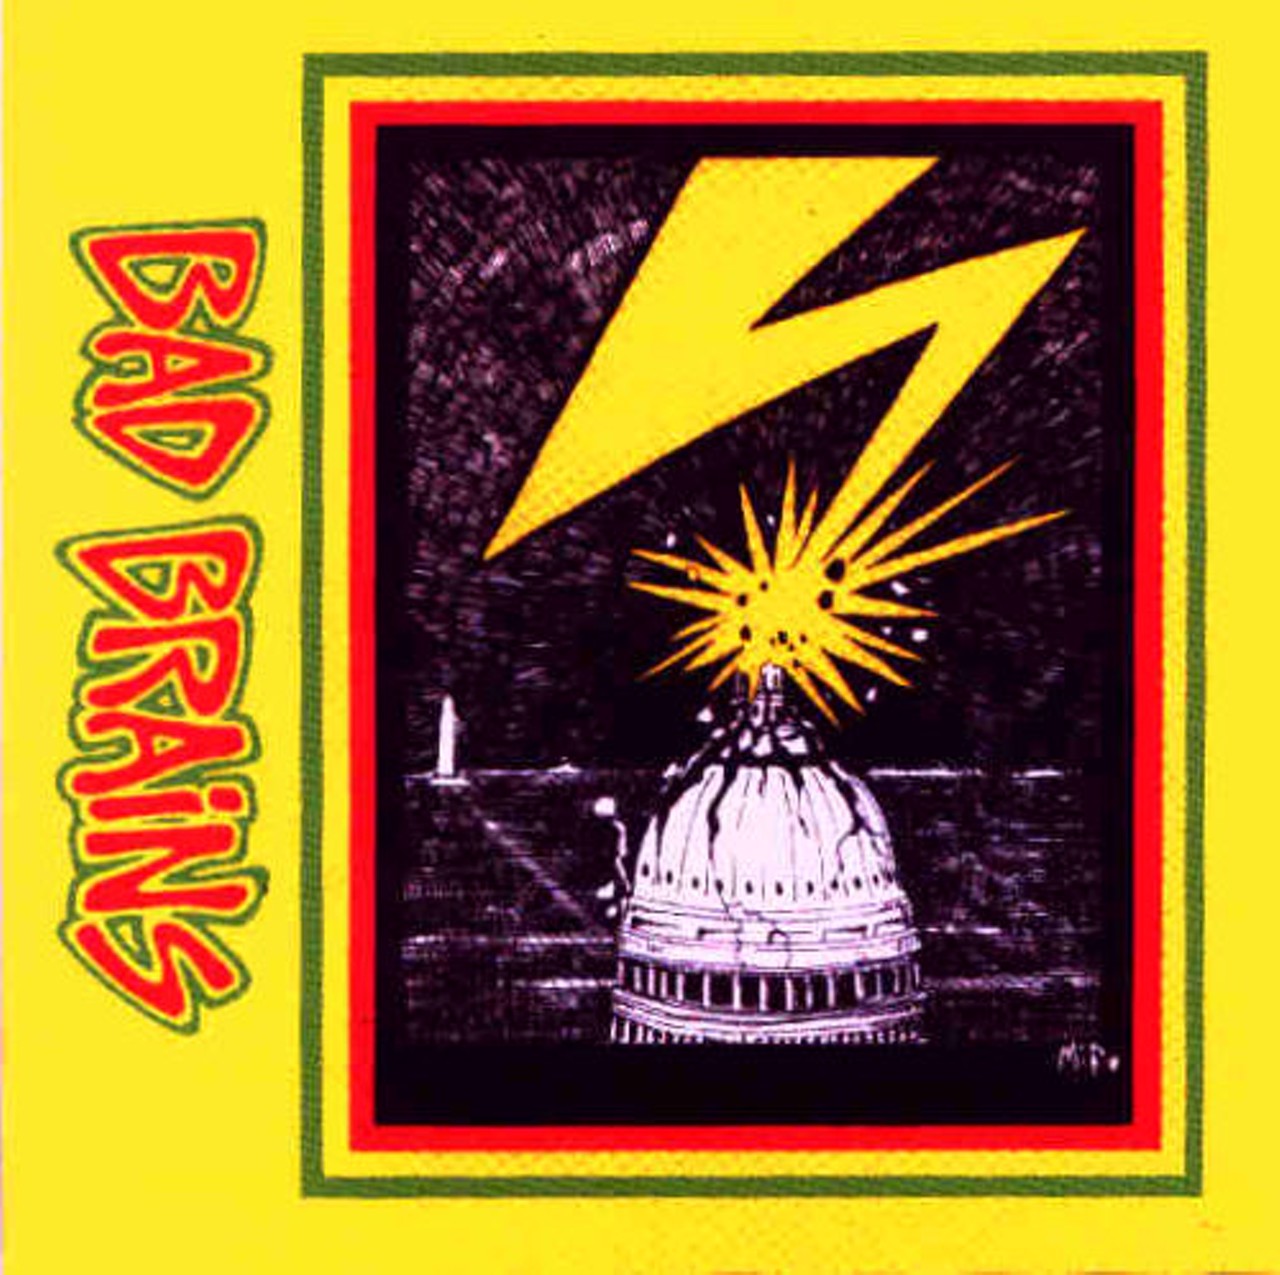 10. Another simple yet efficient way to get an unpatriotic message across: The Capitol dome is struck by lightning for Bad Brains' self-titled 1982 album cover.